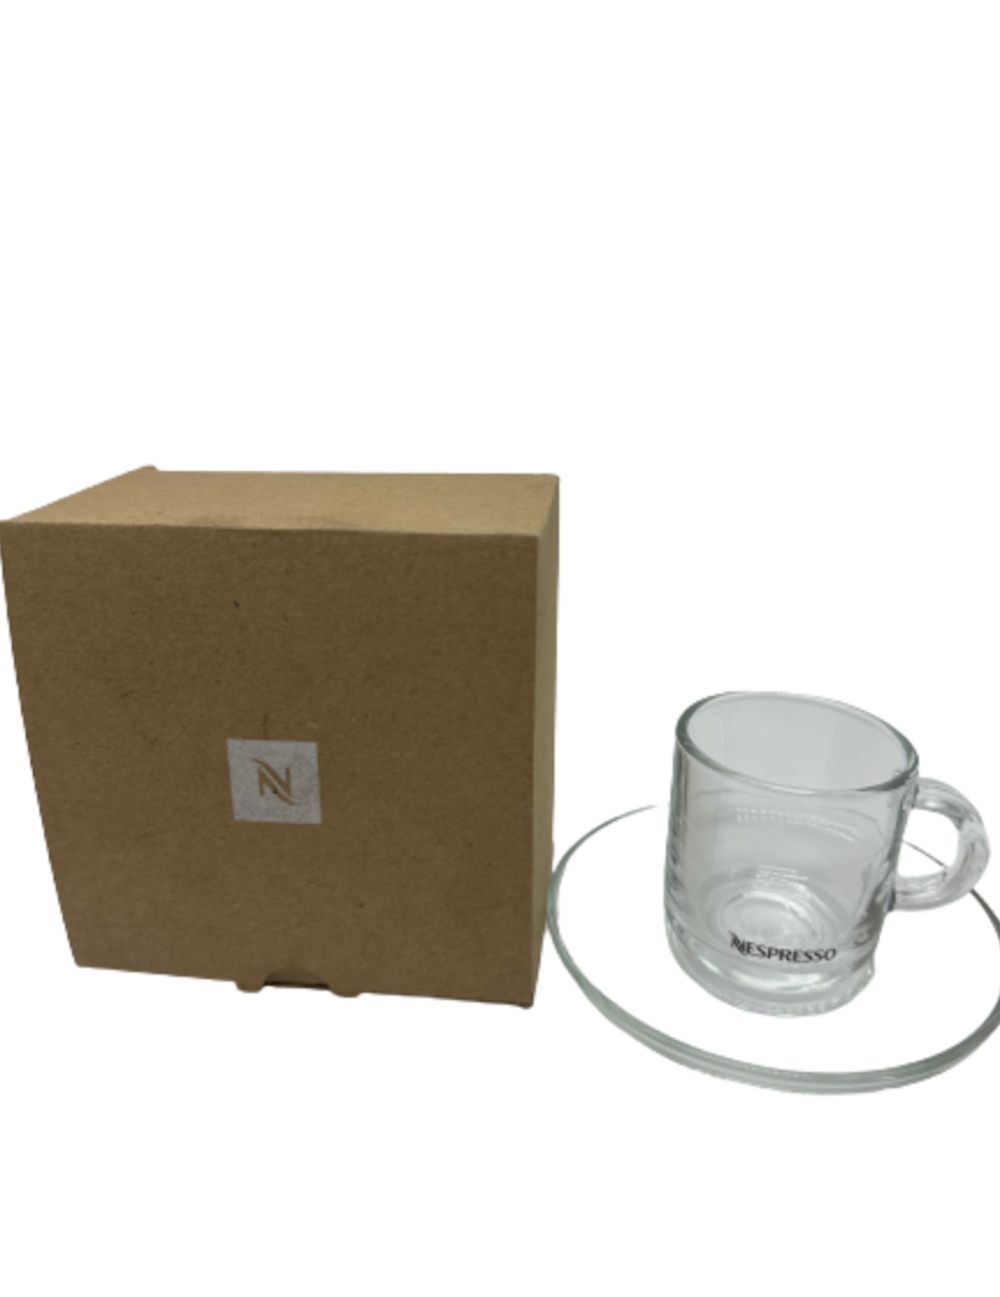 Nespresso Vertuo Espresso Coffee Glass Cup with Saucer New with